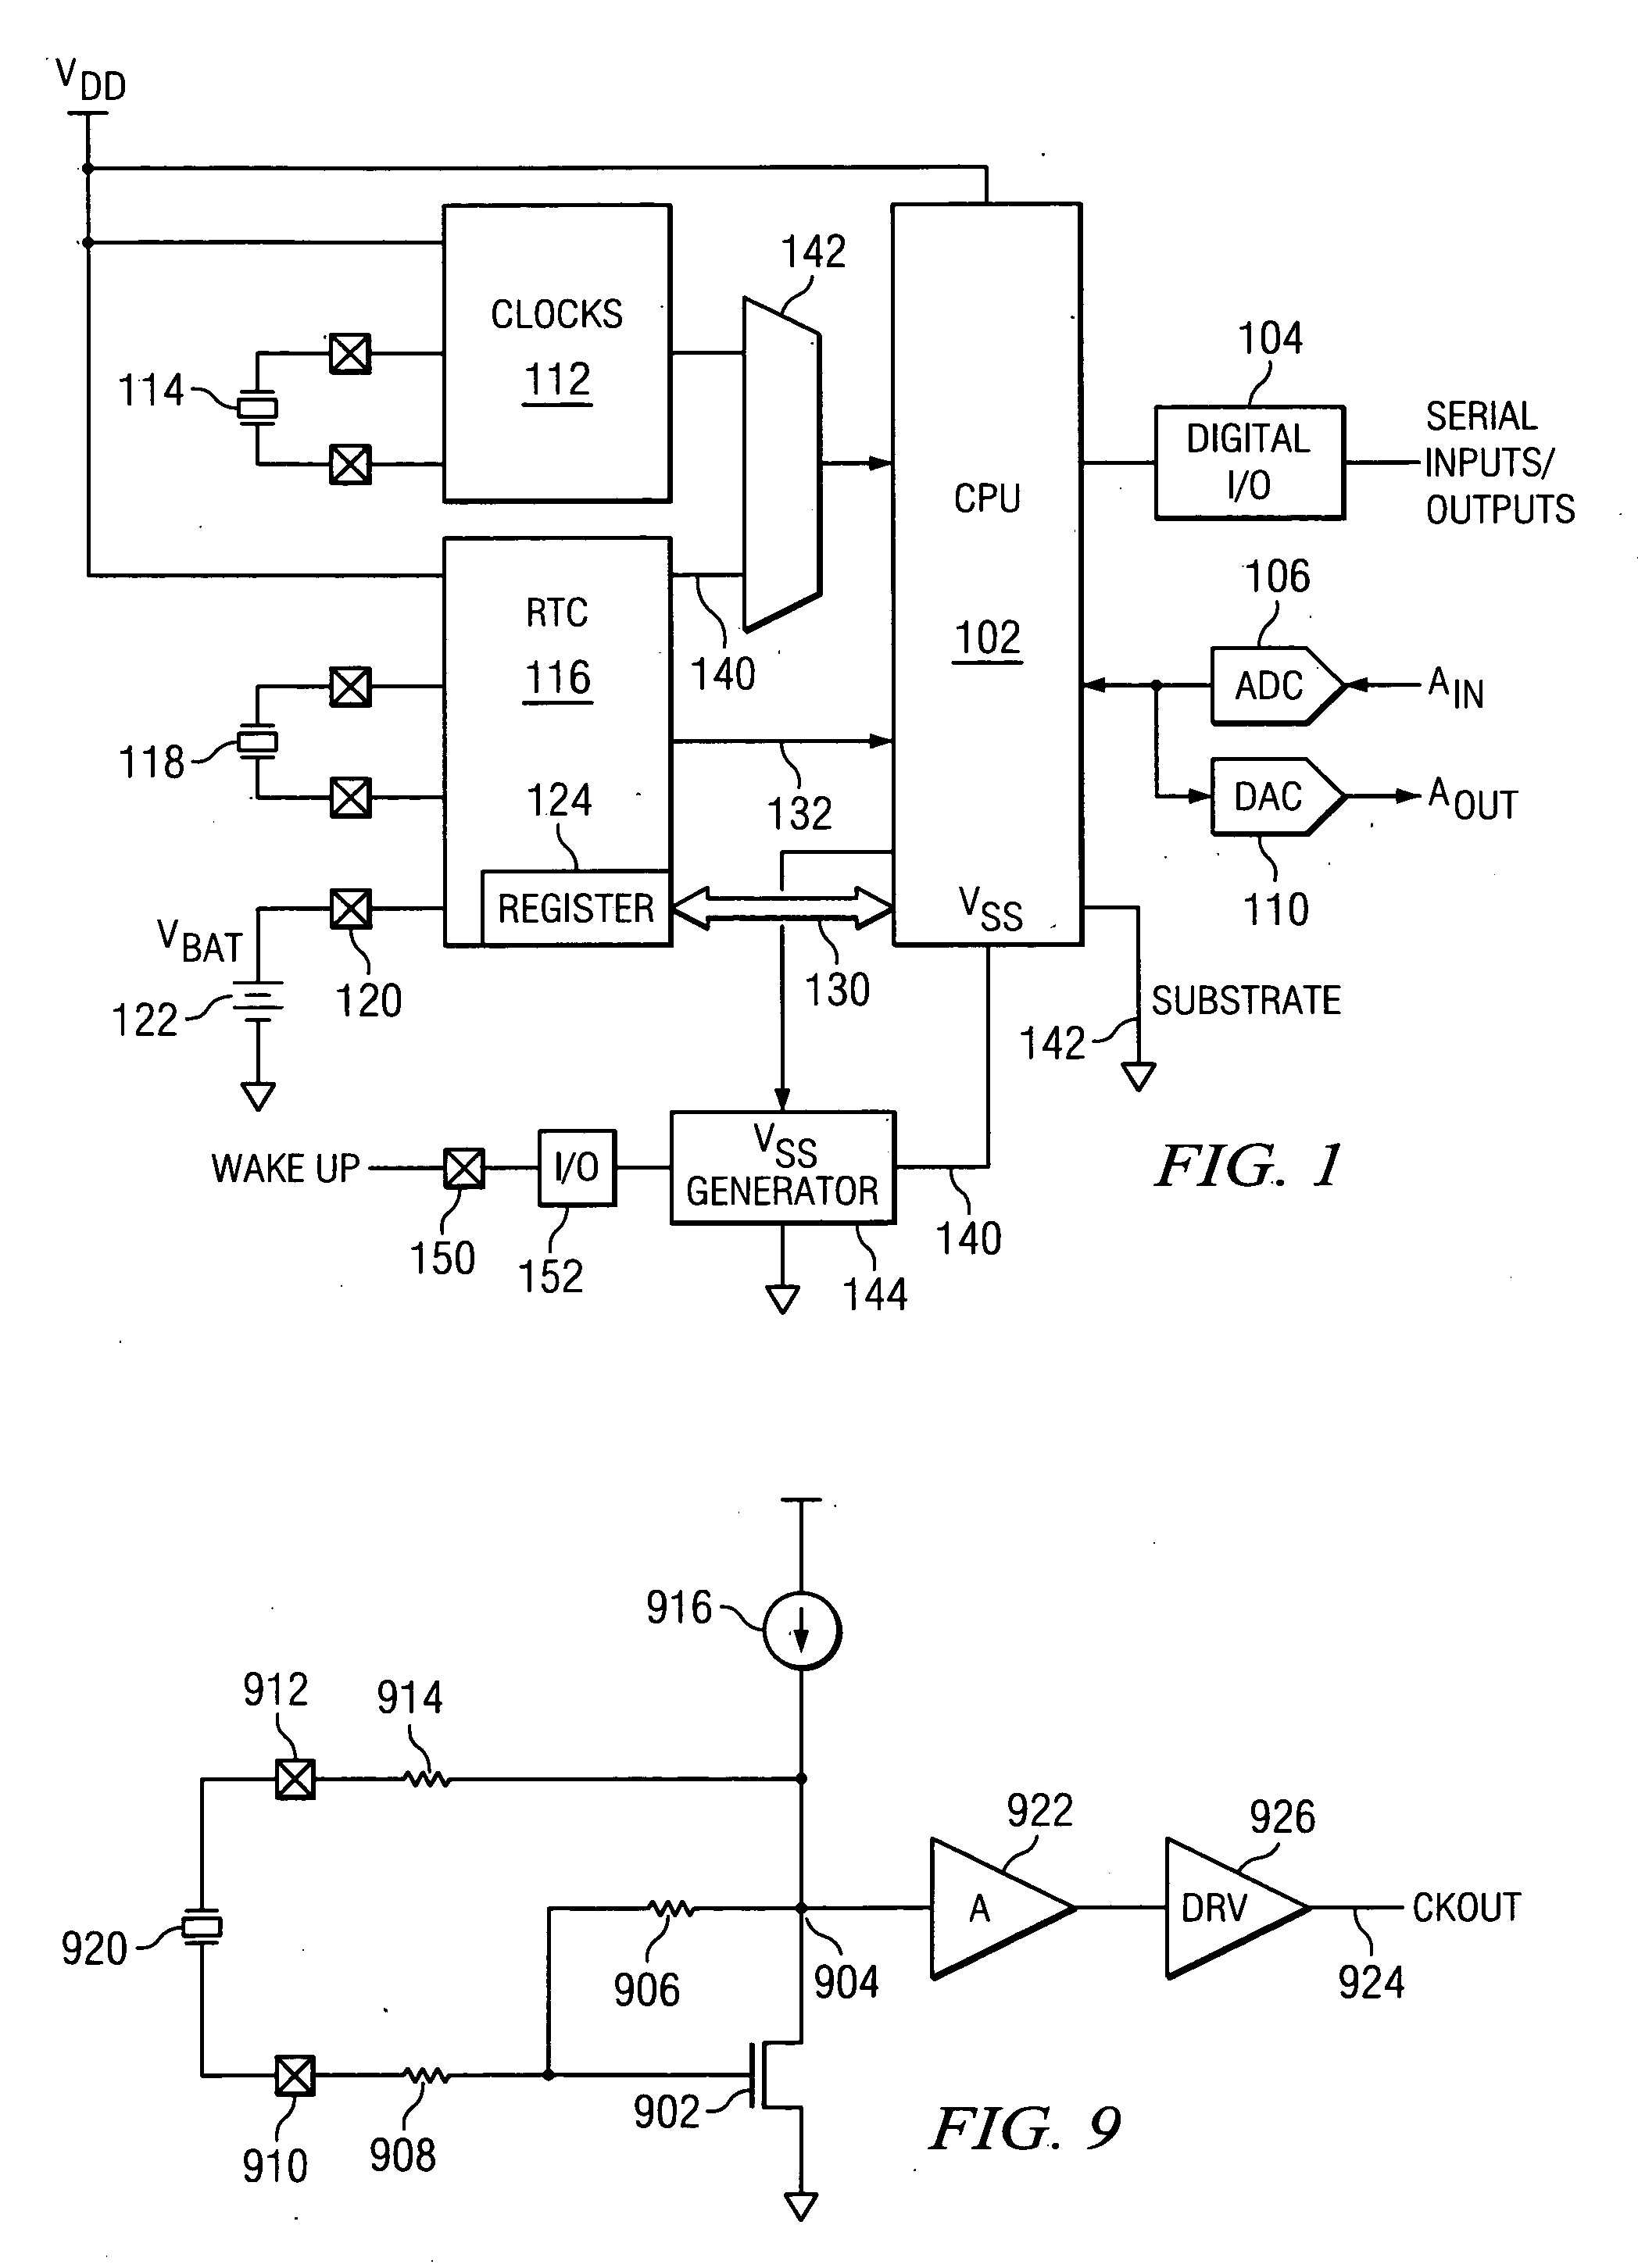 MCU with low power mode of operation